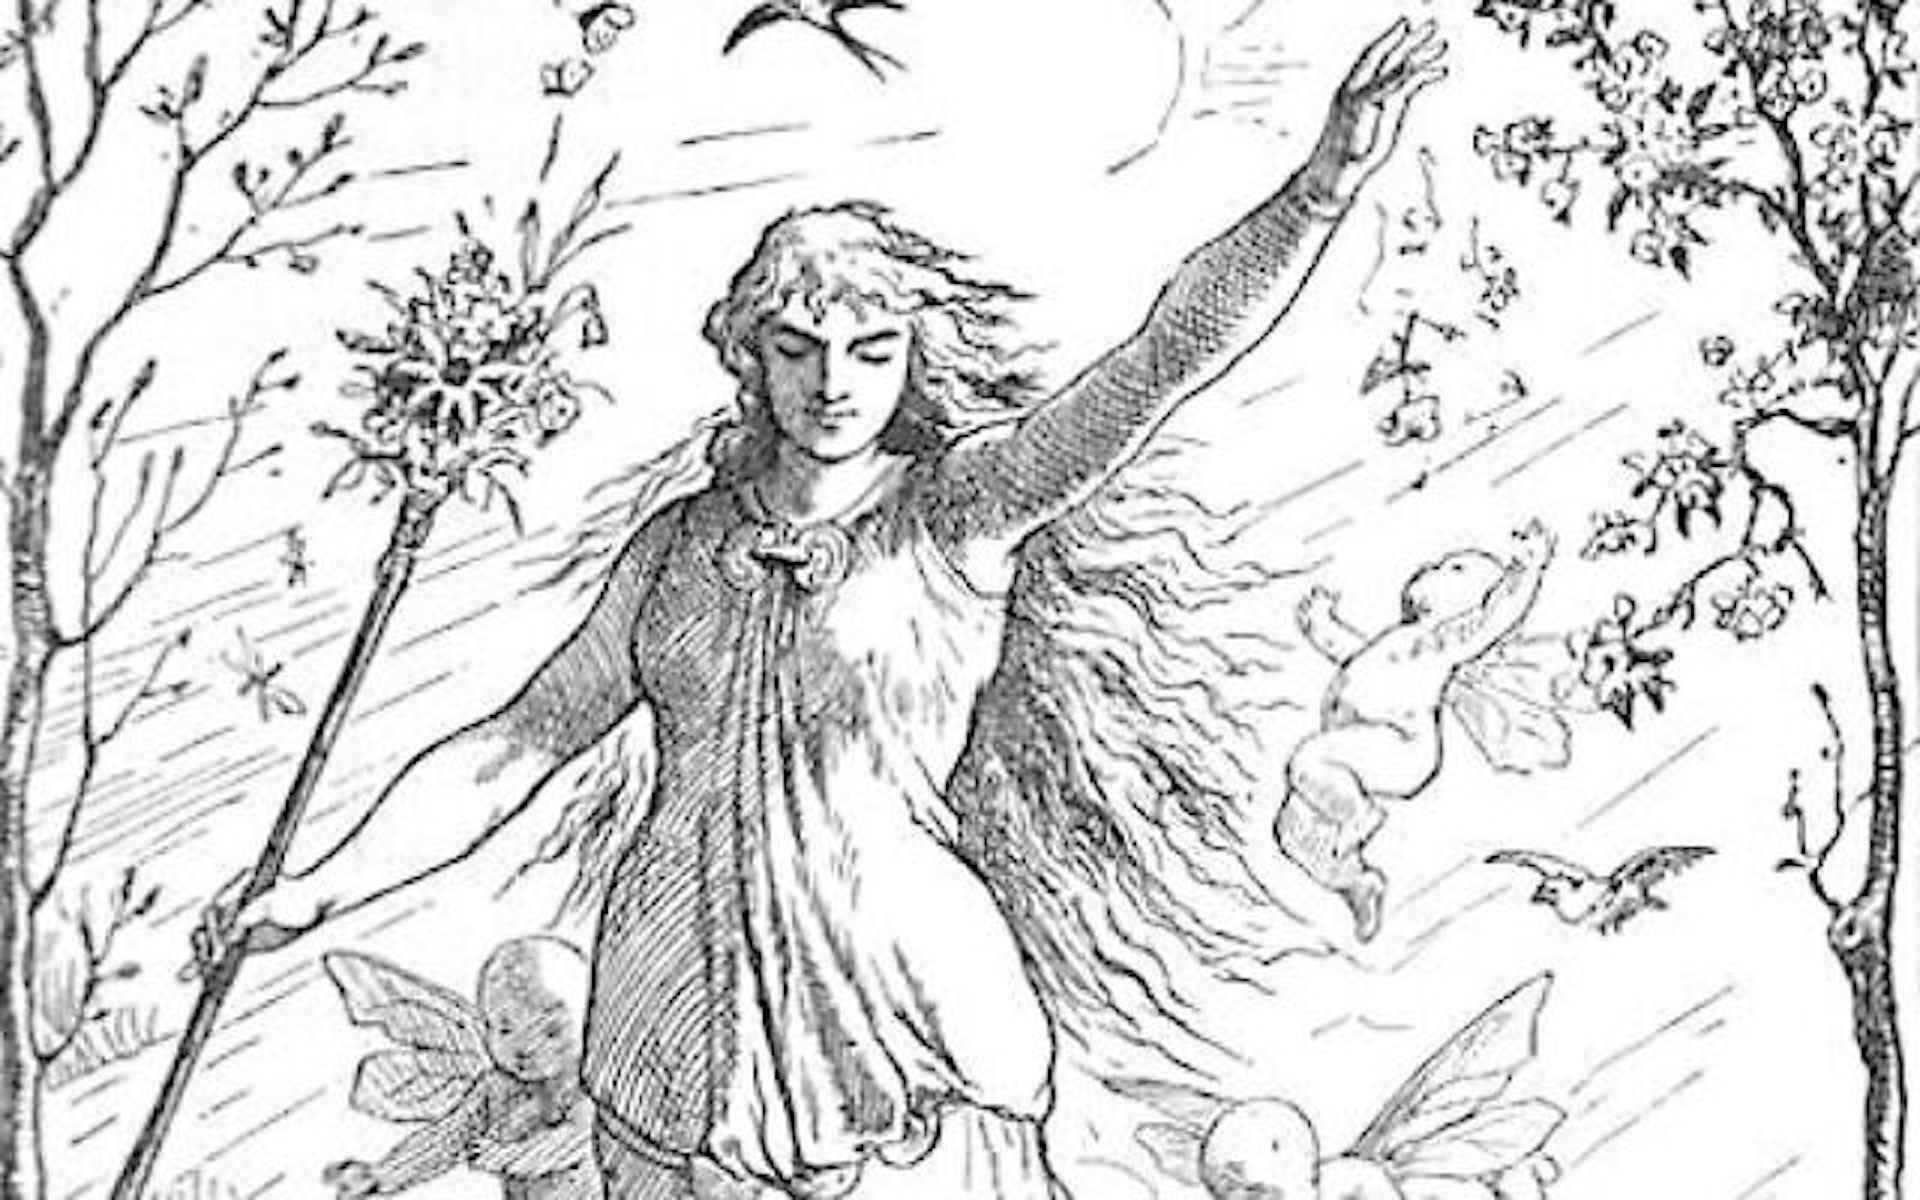 The goddess Ã„â€™ostre/*Ostara flies through the heavens surrounded by winged angels, beams of light and animals.